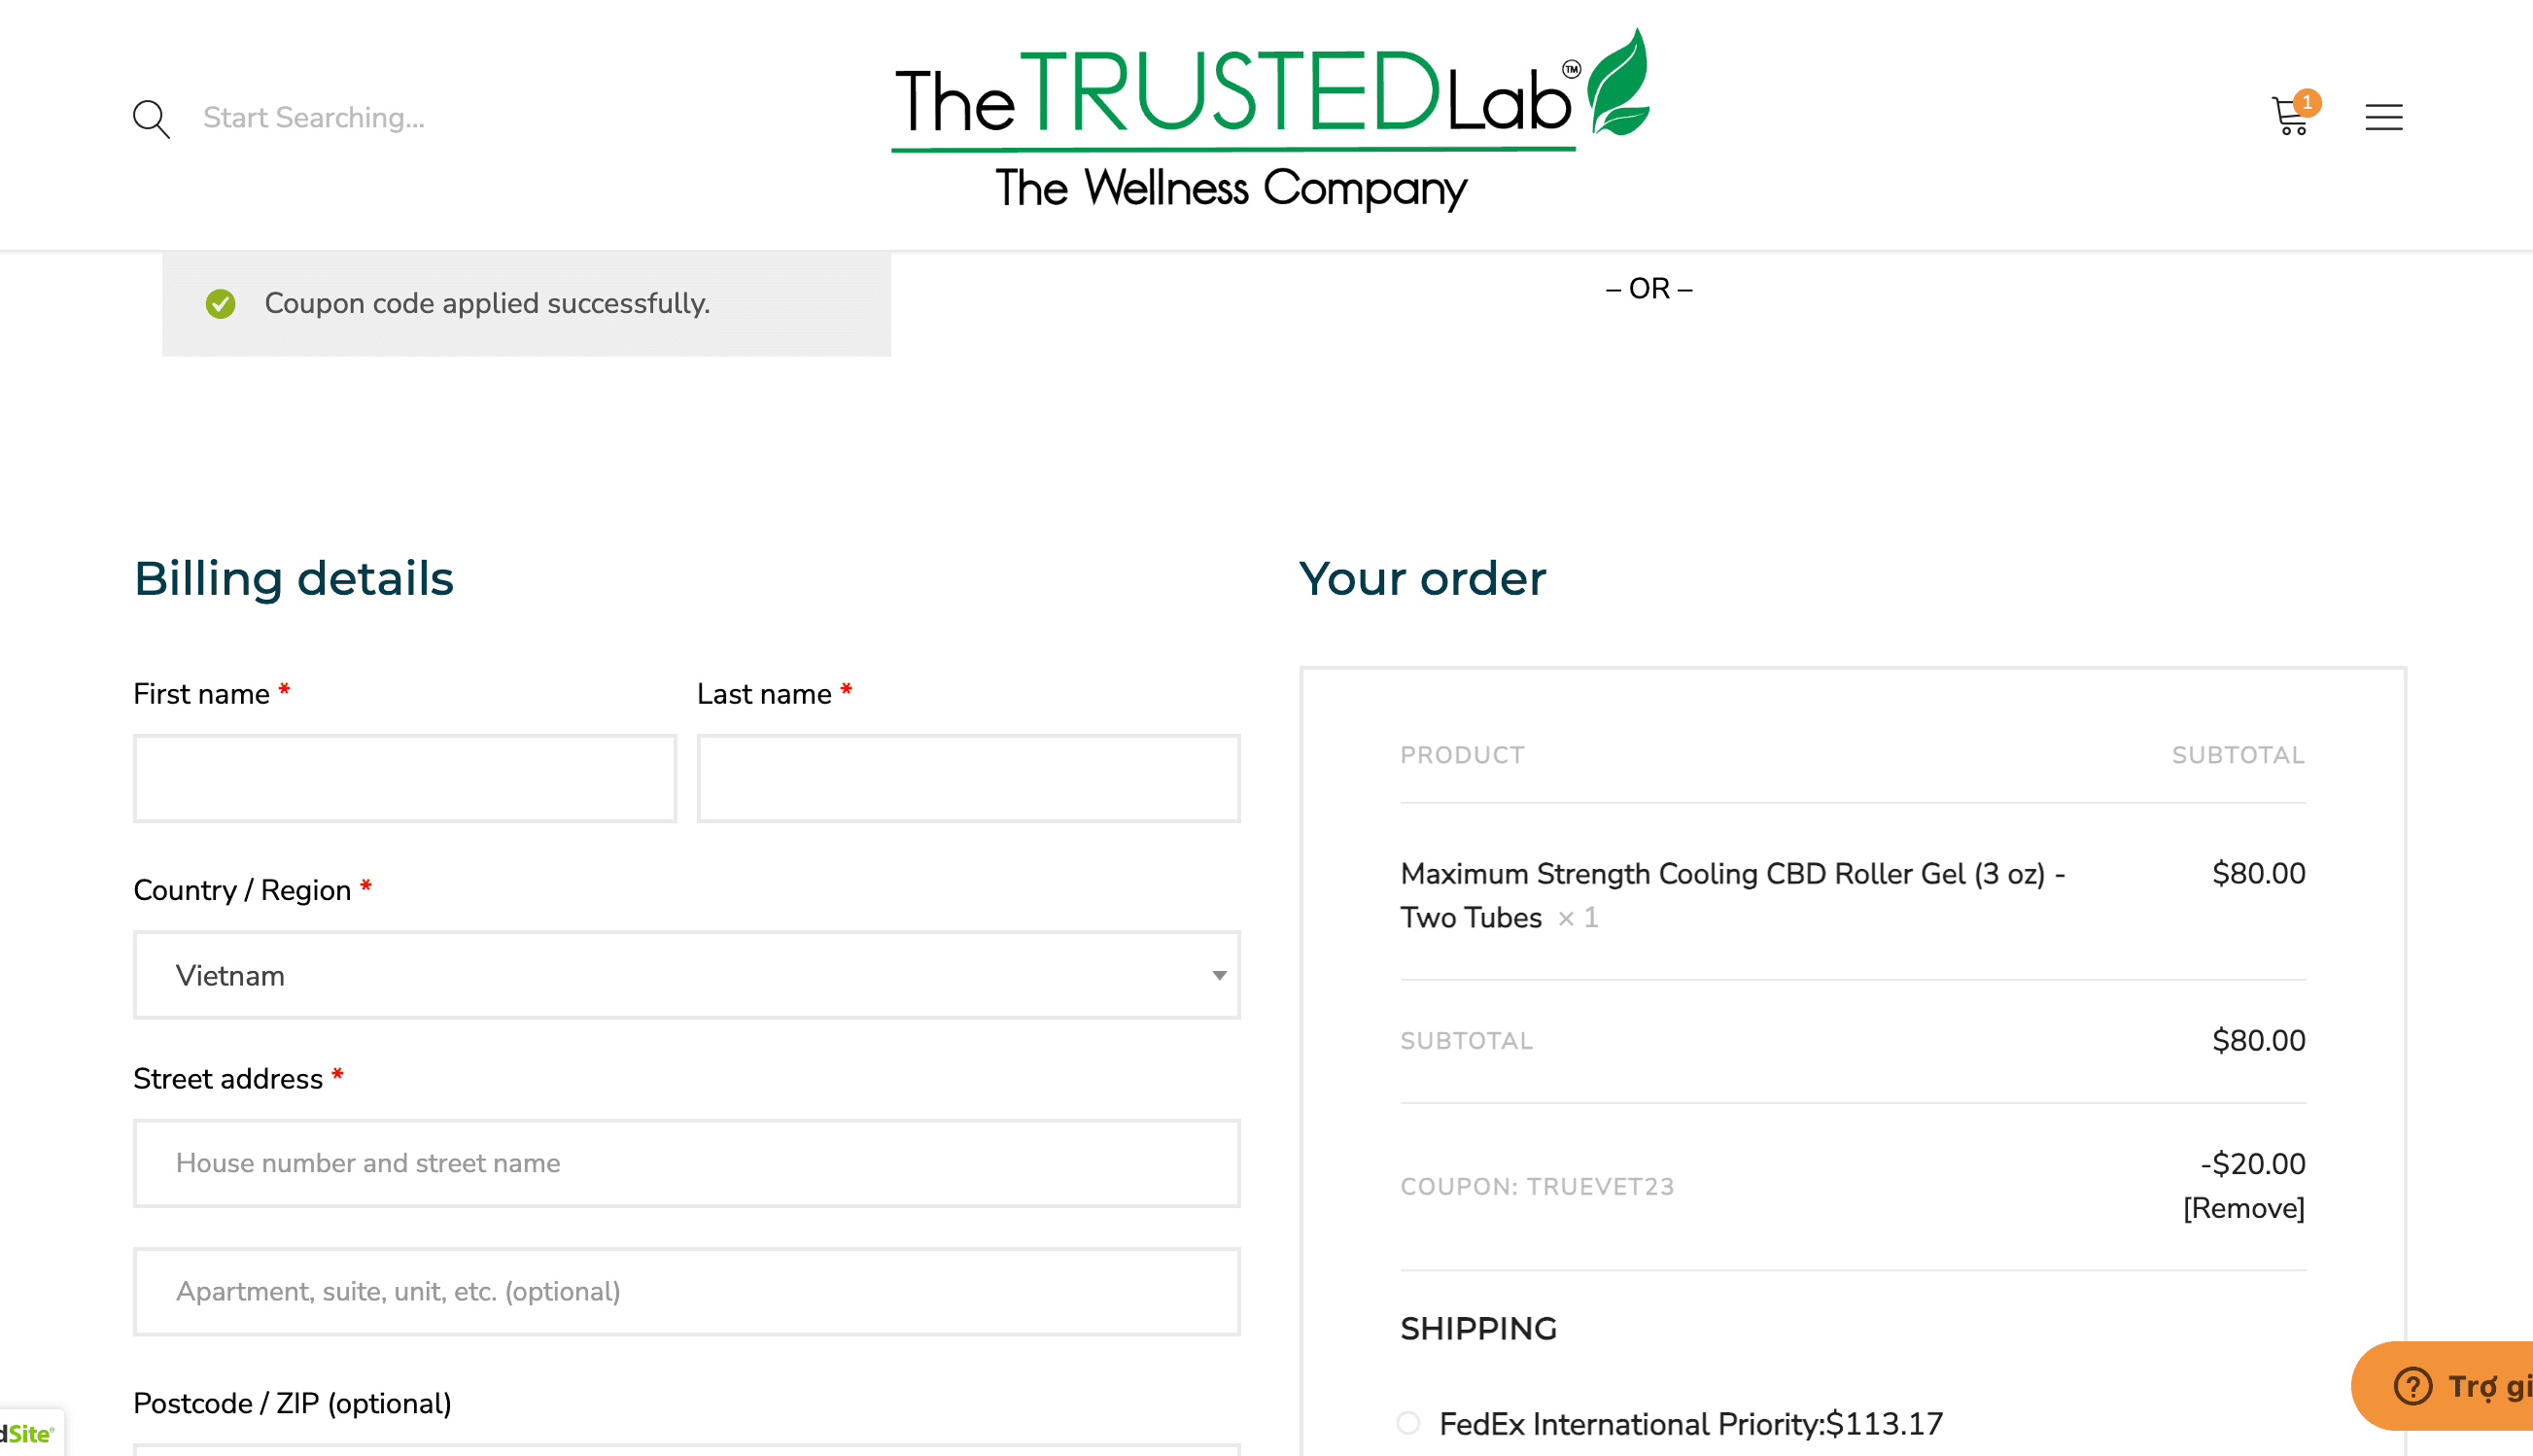 The Trusted Lab apply coupon code